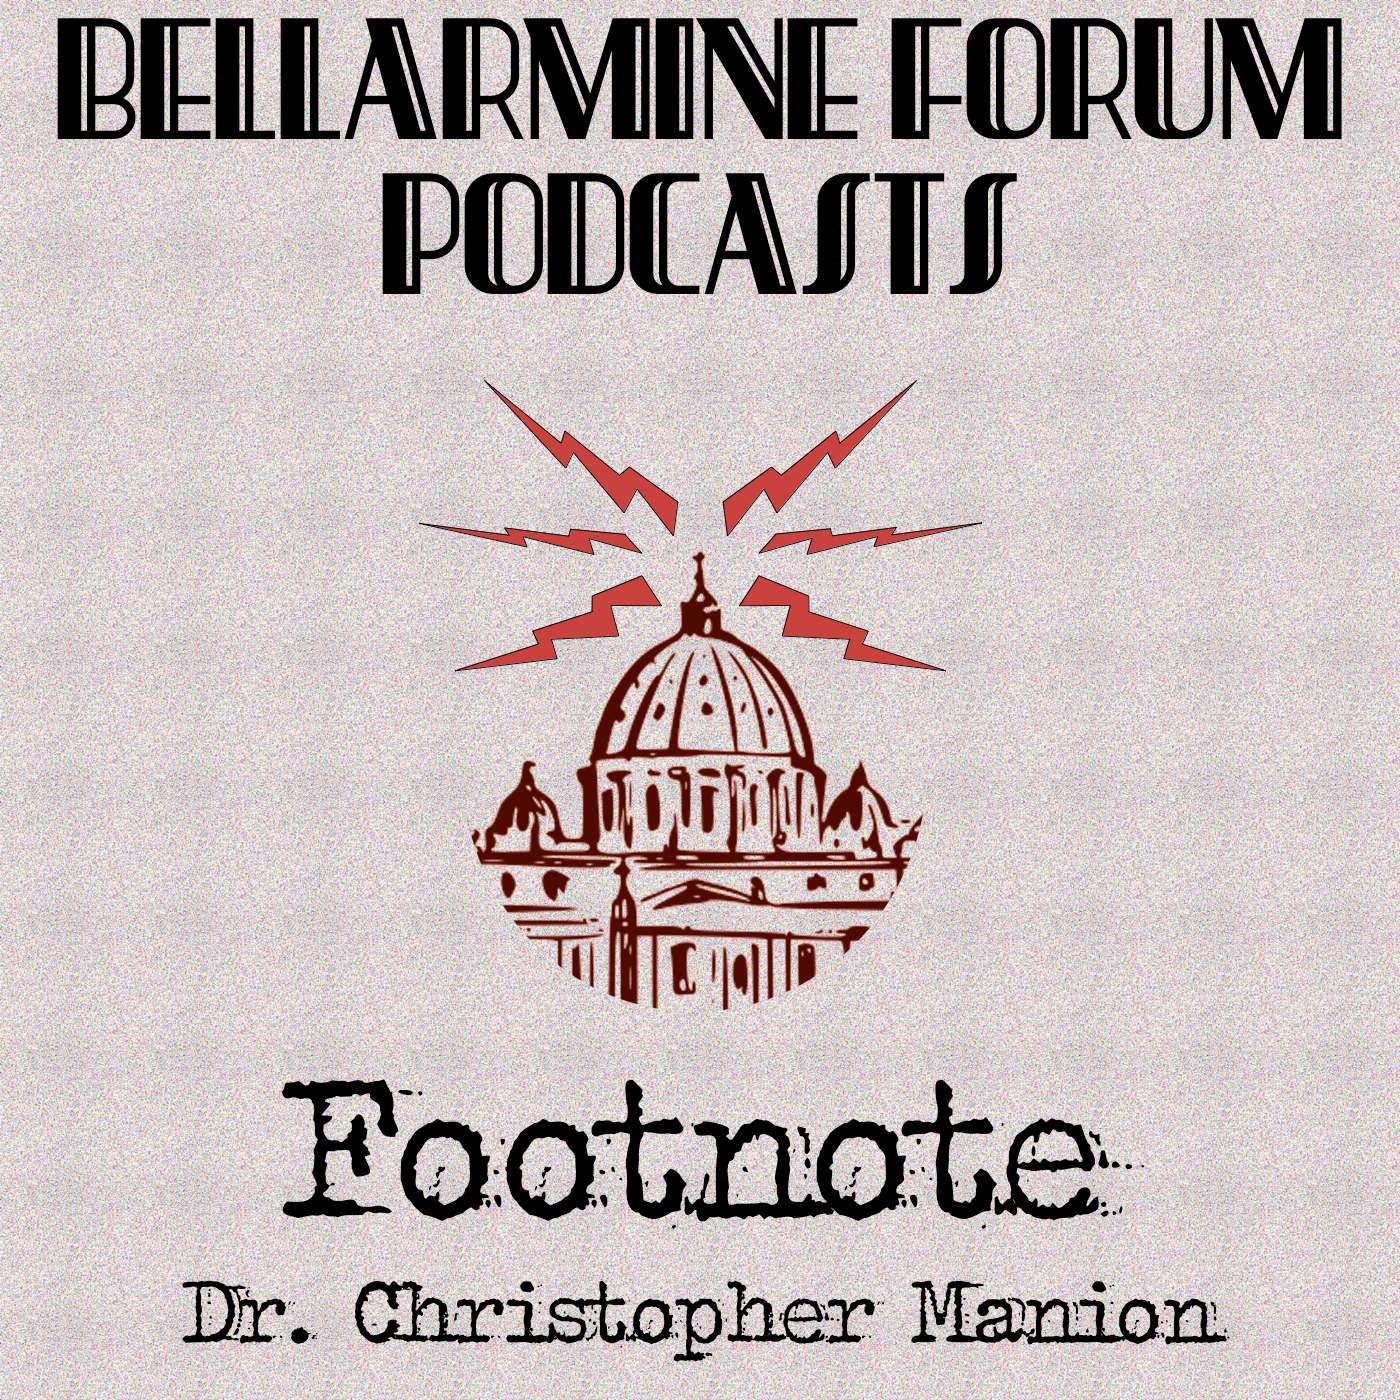 Footnote by Dr. Christopher Manion – The Bellarmine Forum